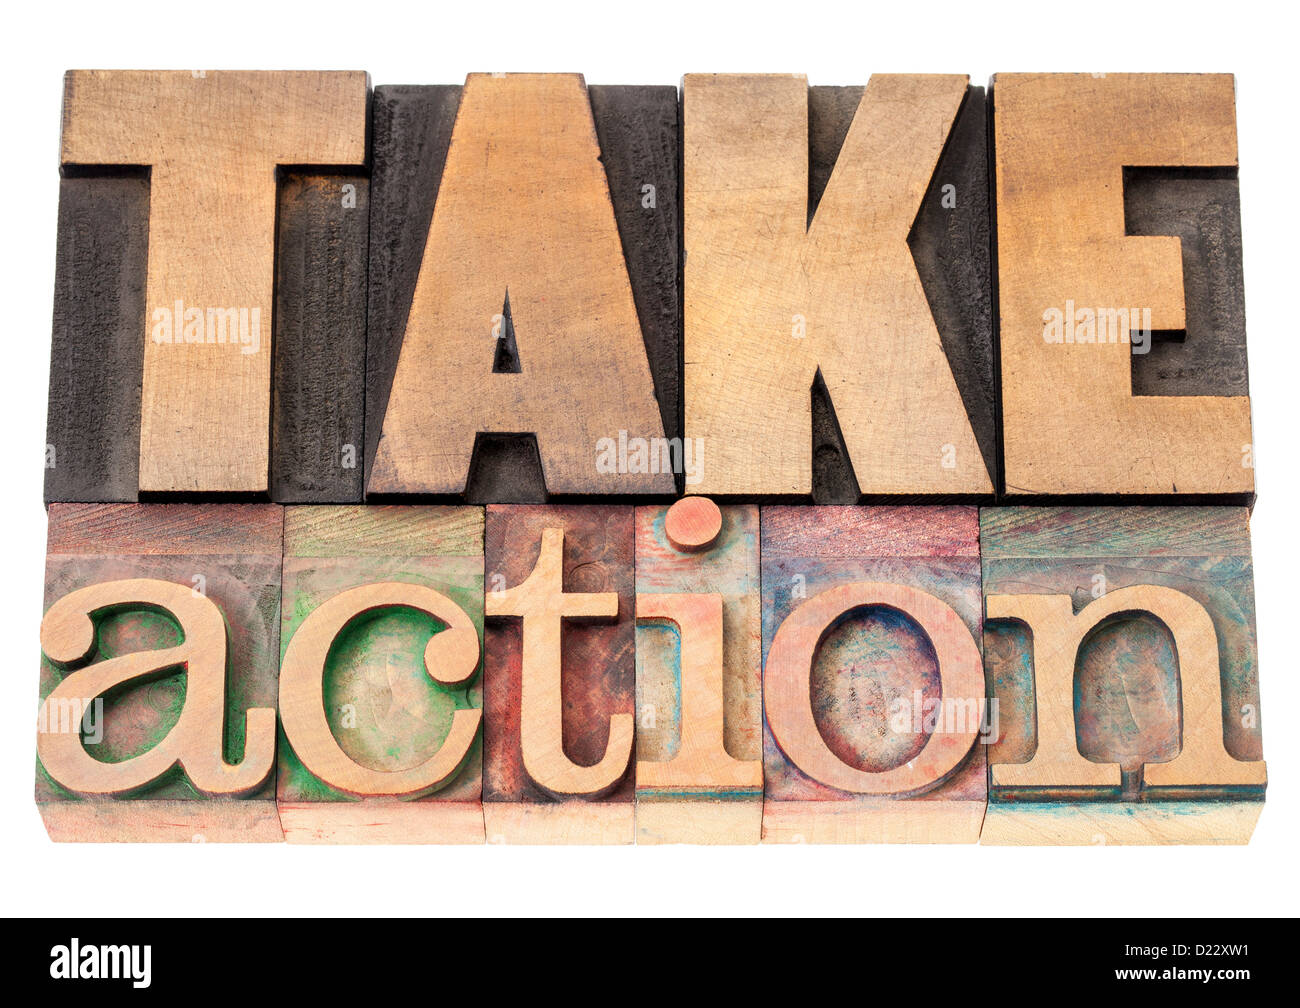 take action - motivation concept - isolated text in vintage letterpress wood type printing blocks Stock Photo